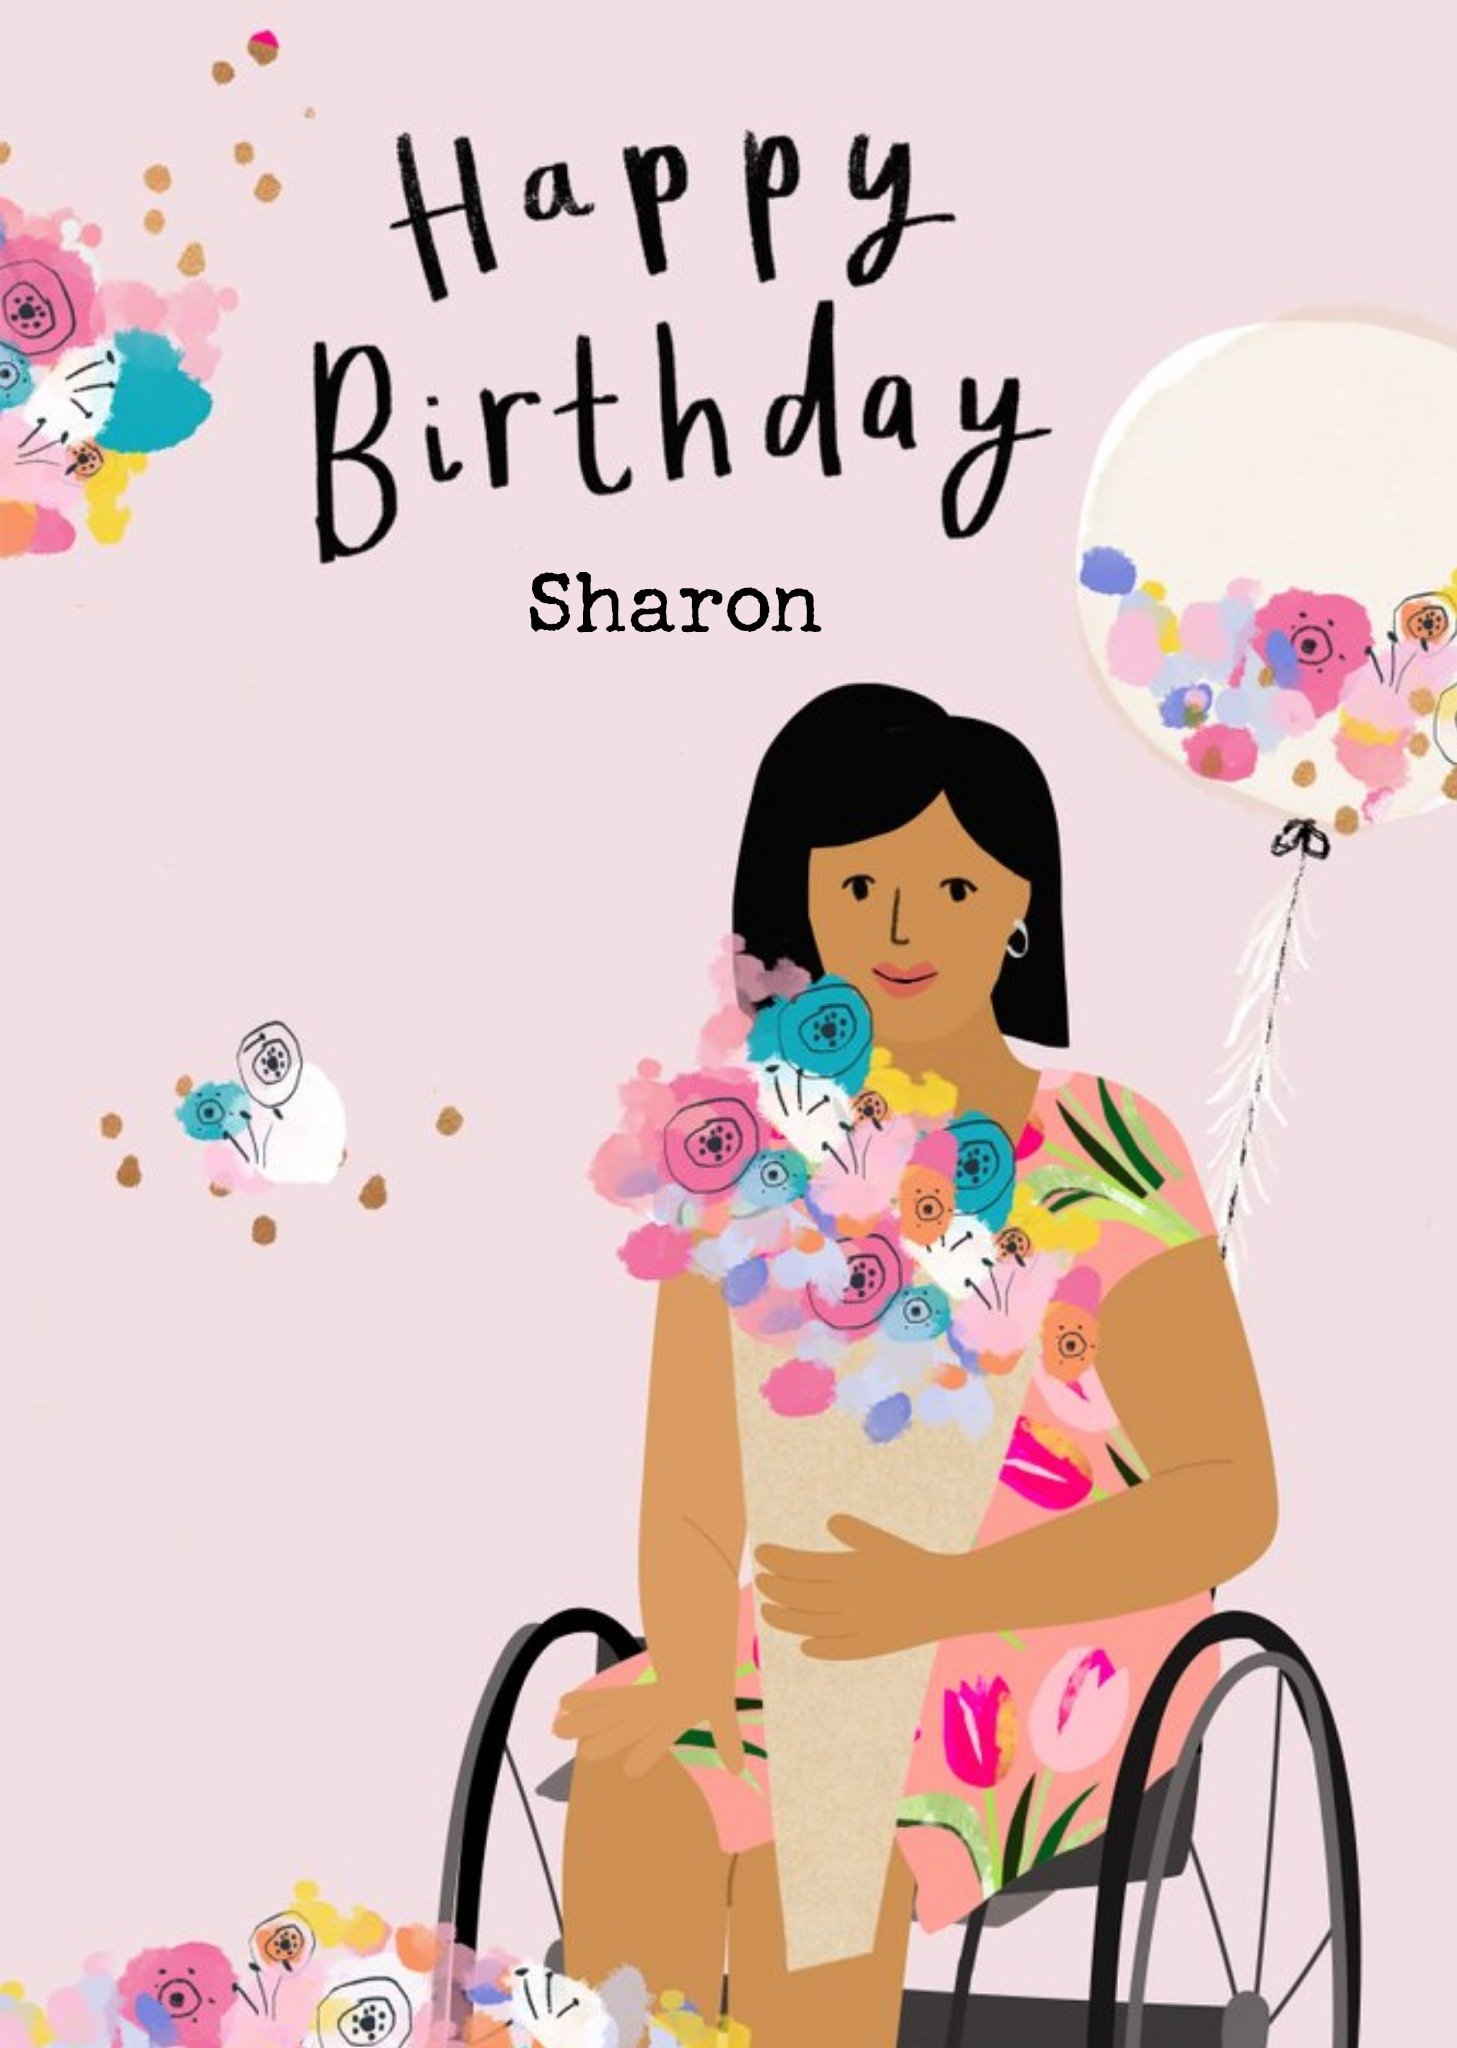 Moonpig Illustration Of A Woman In A Wheelchair Holding Flowers Smiling And Happy Birthday Card Ecar